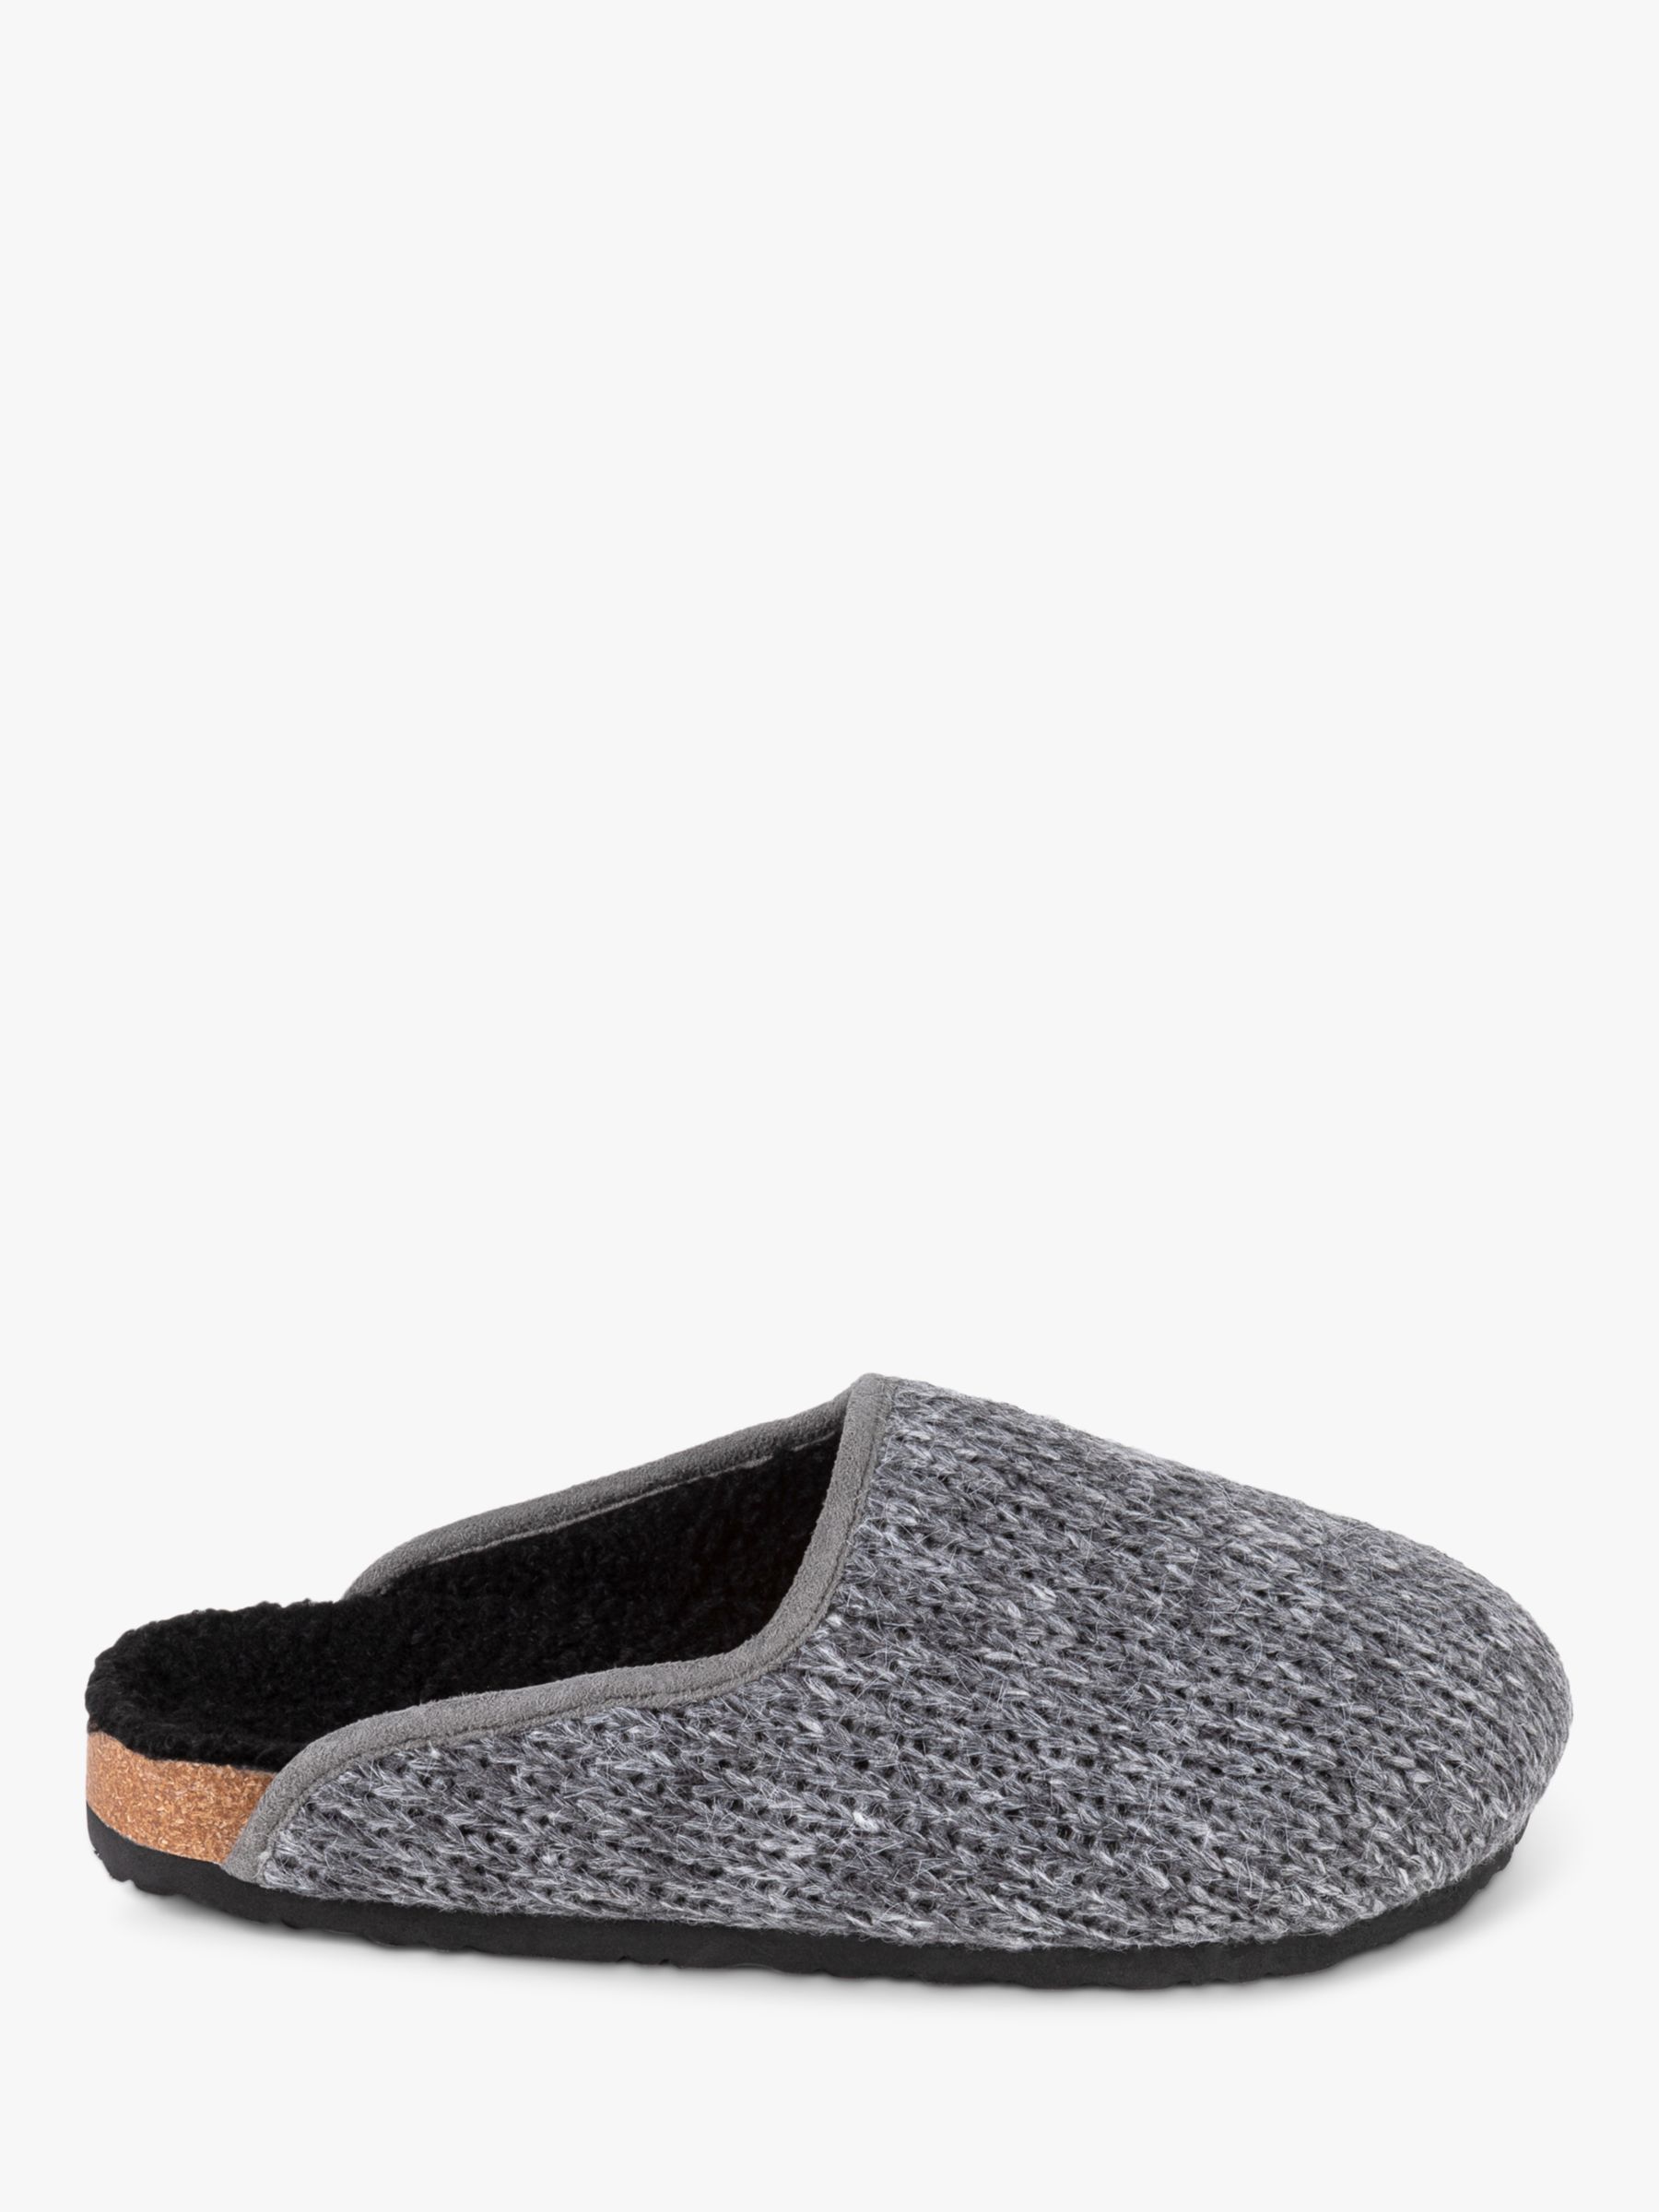 totes Nordic Knitted Mule Slippers, Grey at John Lewis & Partners